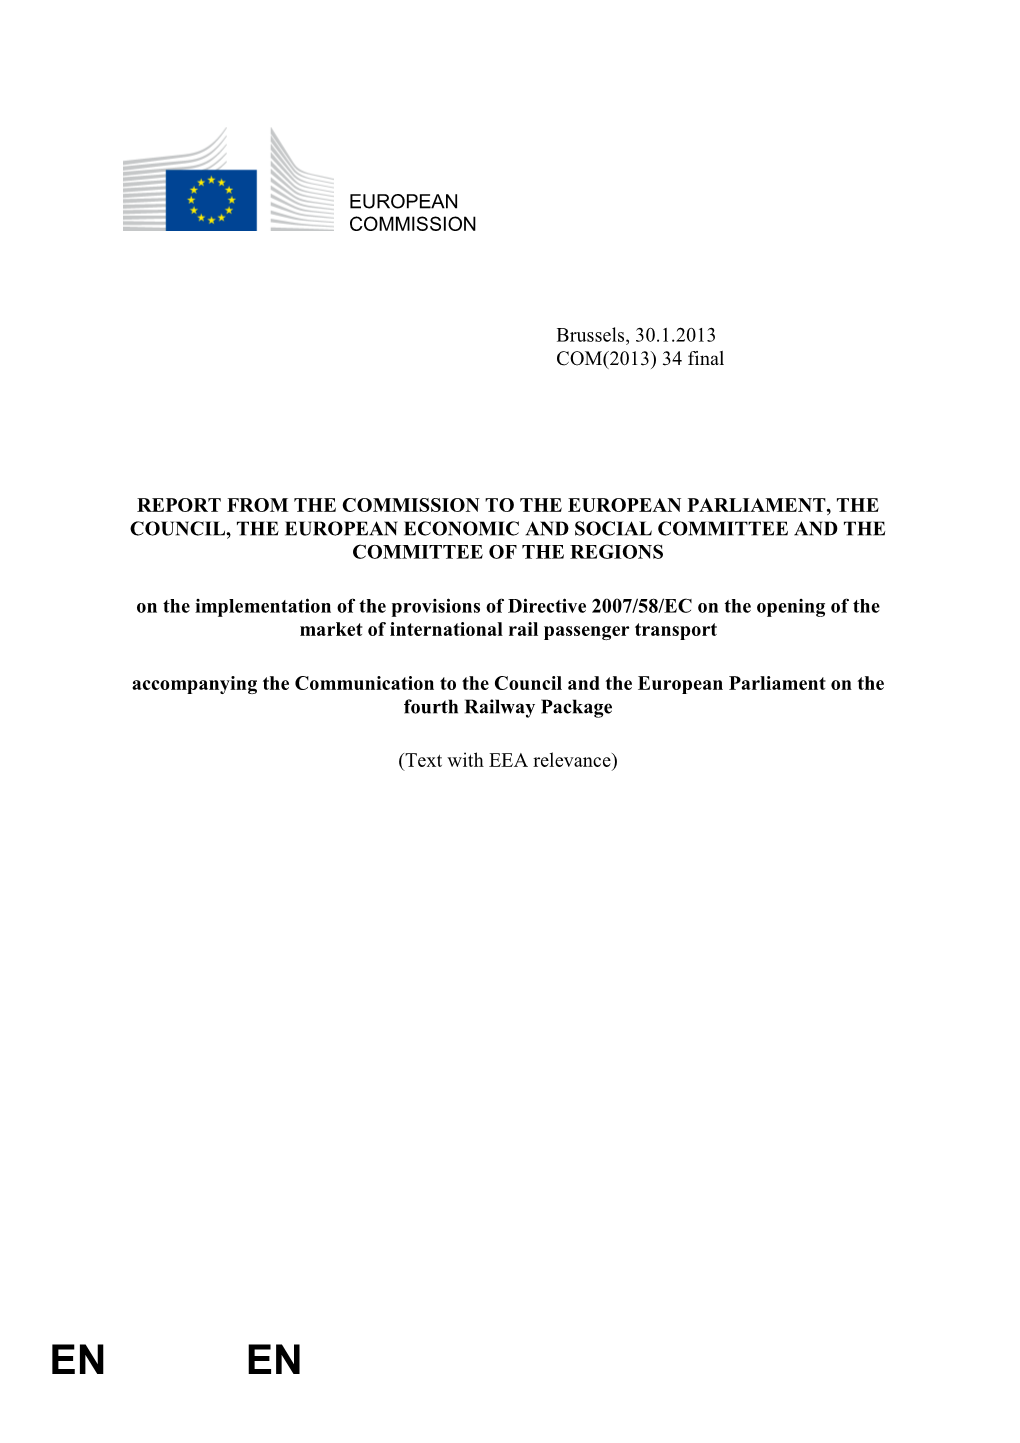 Report from the Commission to the European Parliament, the Council, the European Economic